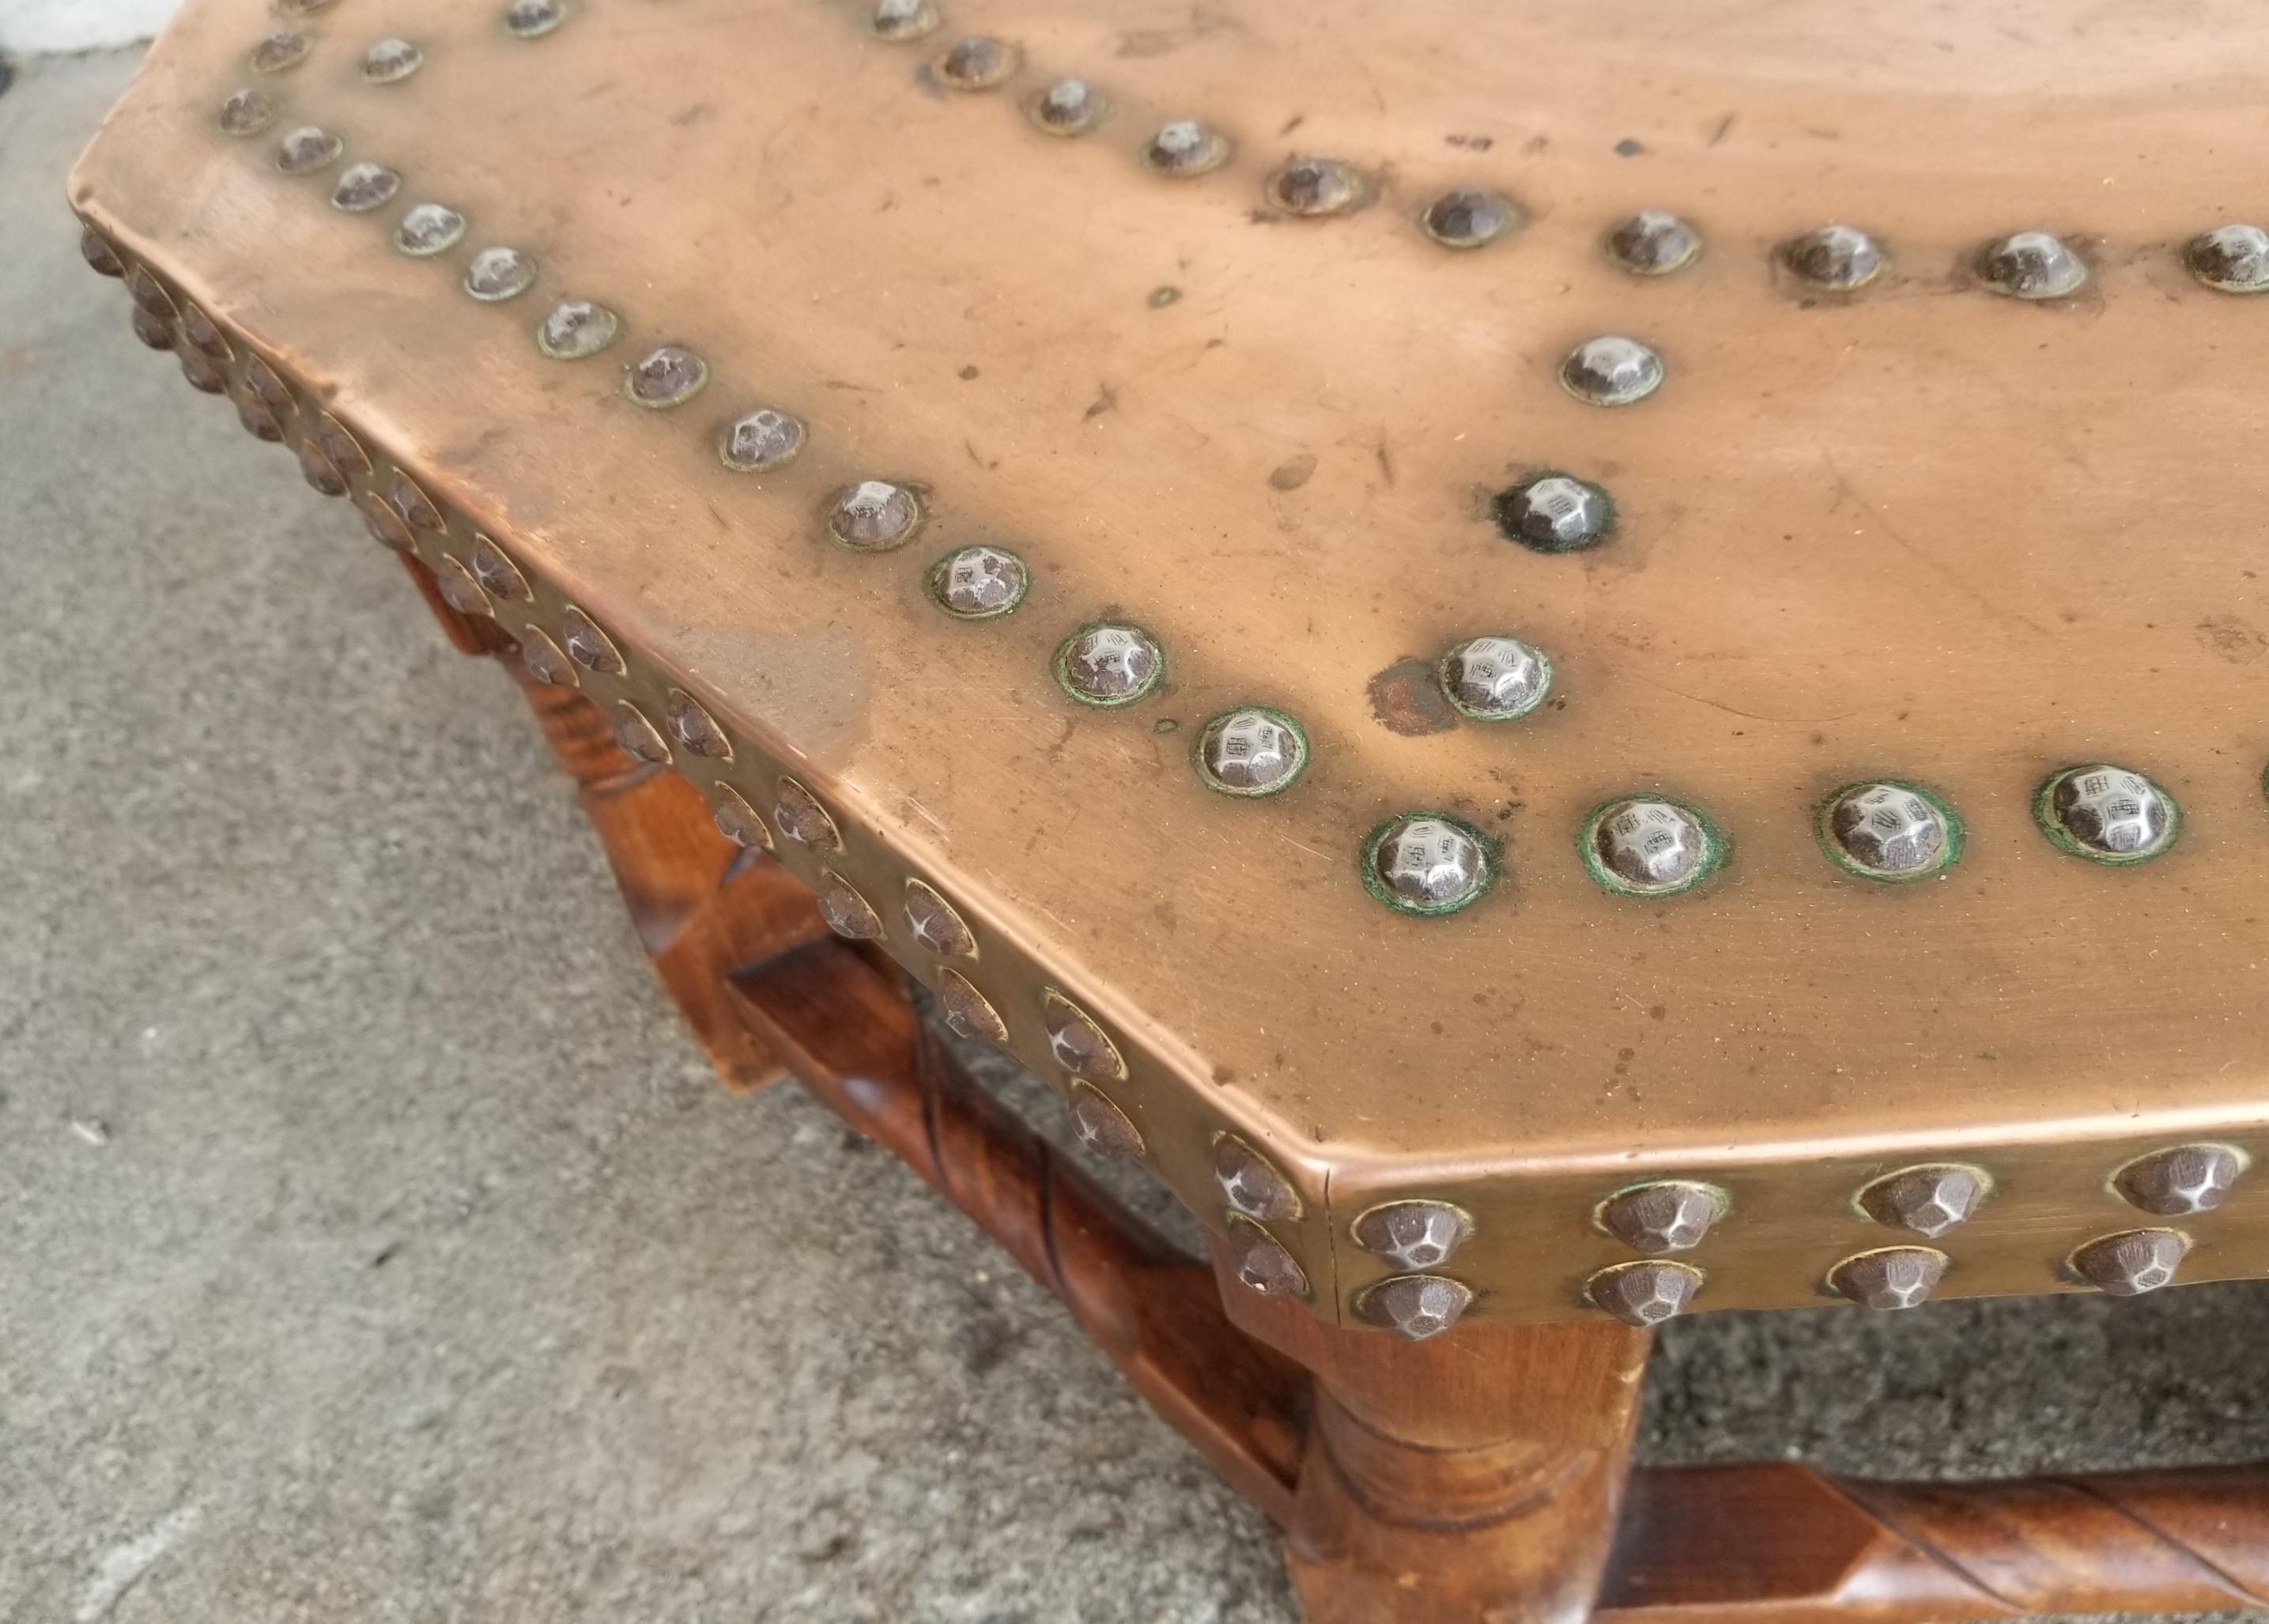 Handsome copper top octagonal coffee table with hammered tack pattern detail. Nice addition to an Arts & Crafts, California Rancho or organic modern interior.